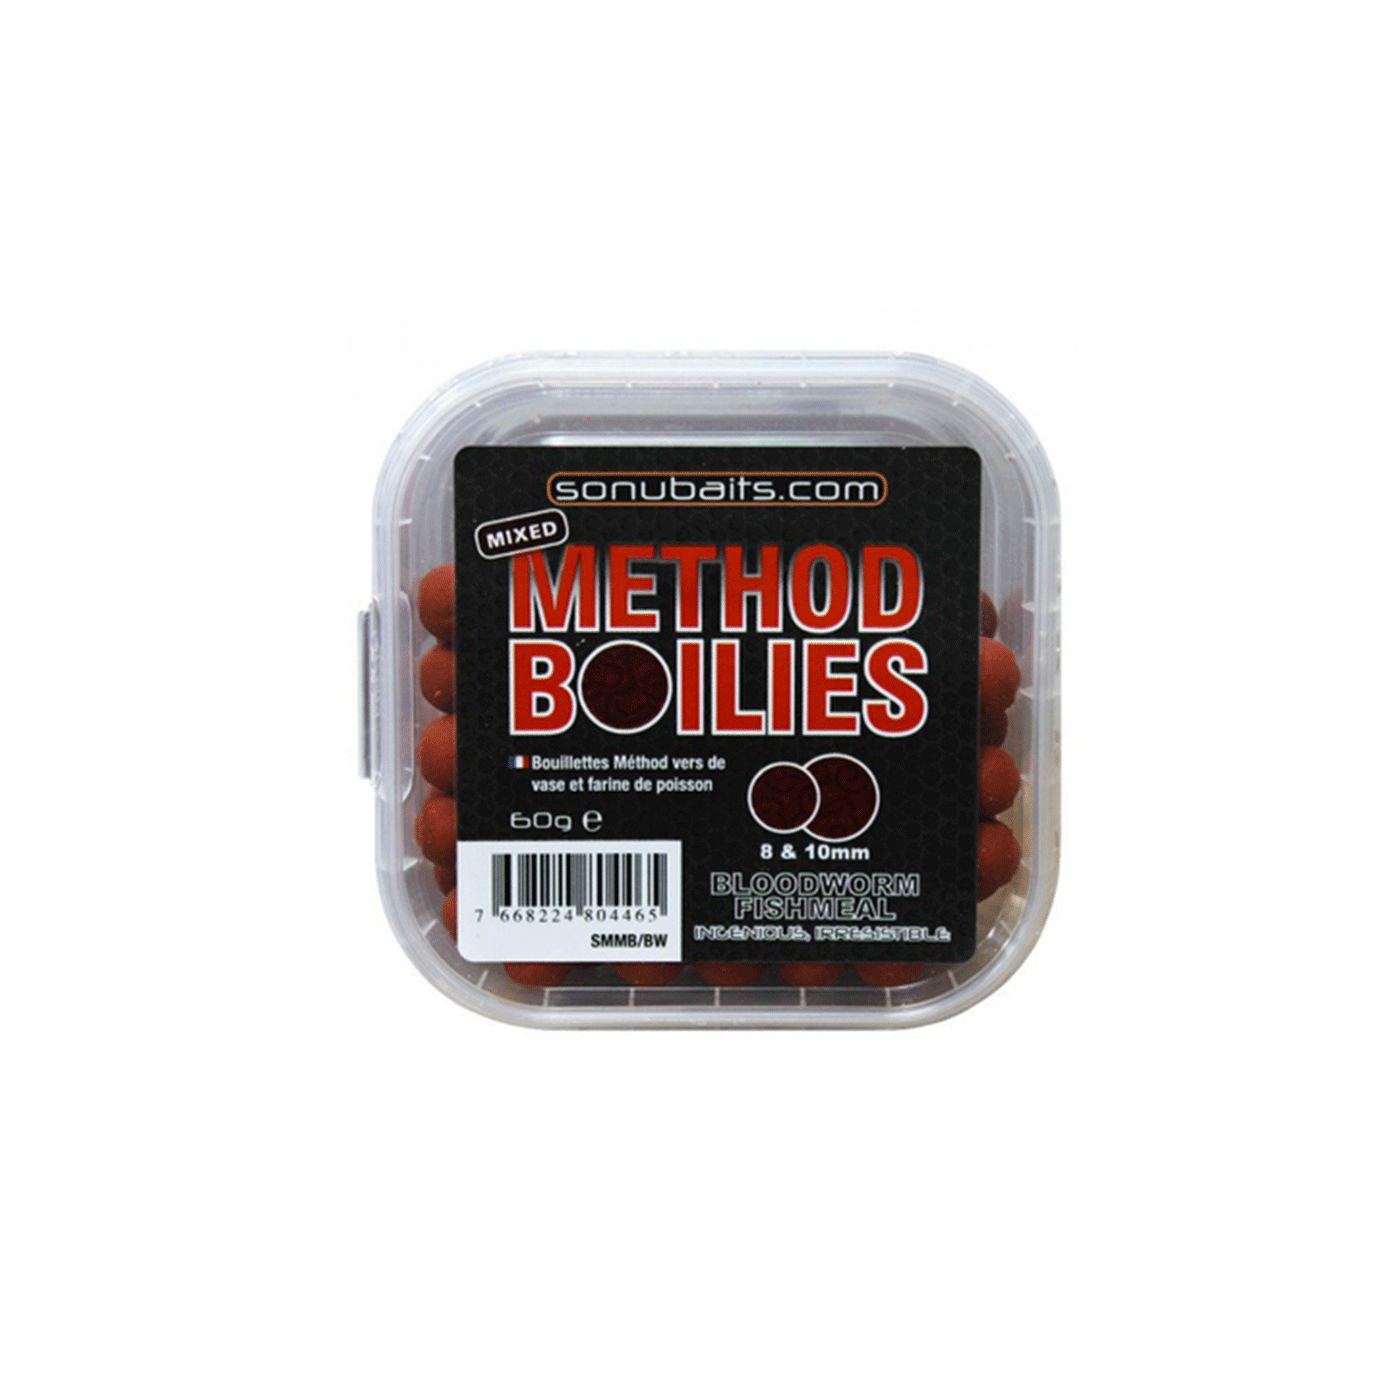 SONUBAITS - MIXED METHOD BOILIES 8 & 10mm BLOODWORM FISHMEAL 60g